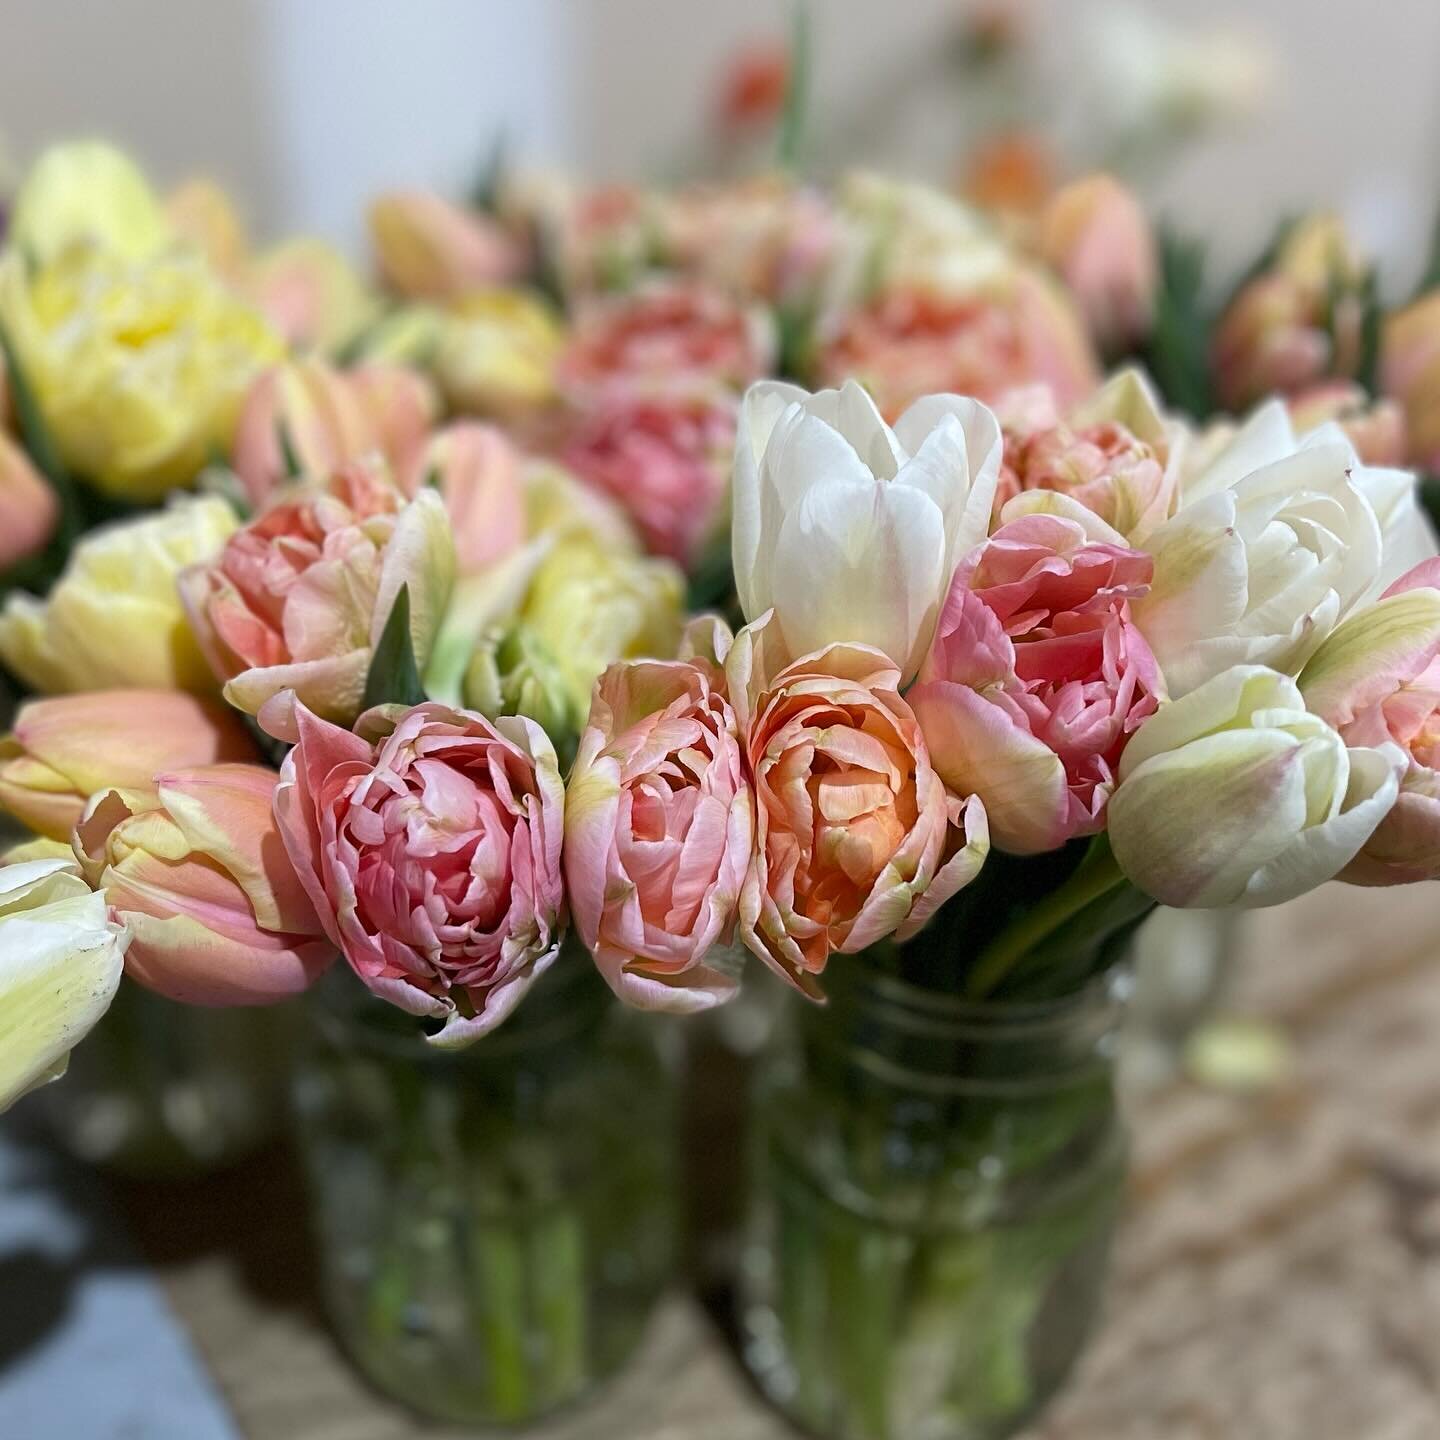 We&rsquo;ve got tulips just in time for Easter! You can find bunches @washmocoffee and we&rsquo;ve got bunches and mason jars available at the Meyer Family Barn in New Haven. 
.
.
.
#springflowers #sweetsoilfarm #washingtonmo #washmo #newhavenmo #mis